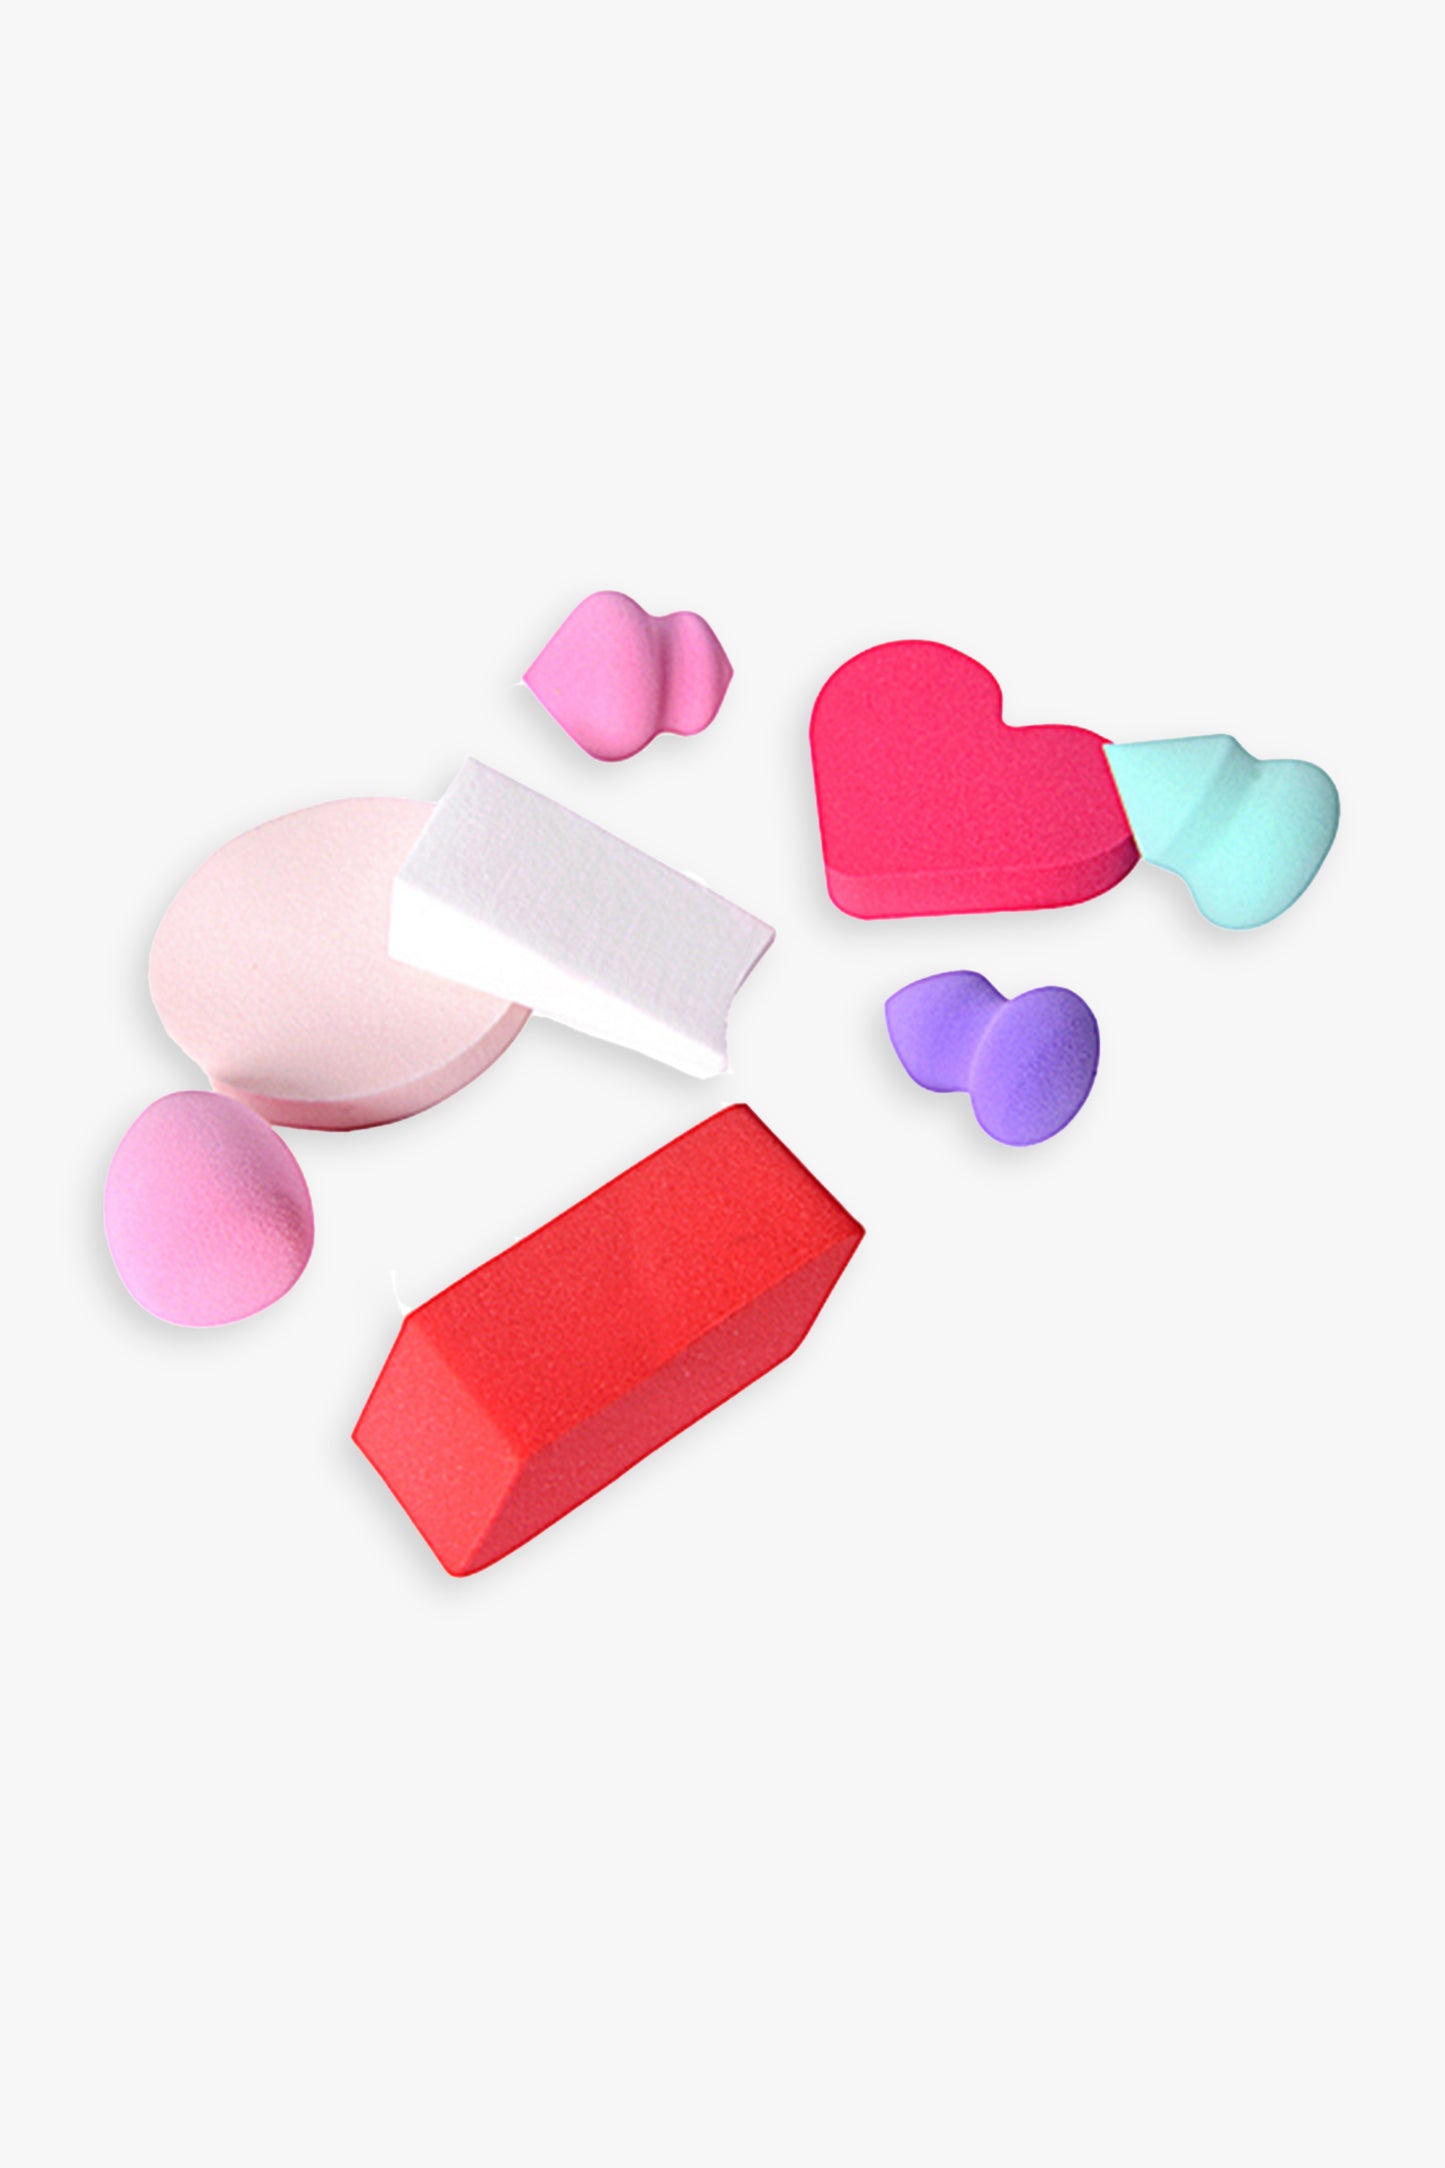 Day In Day Out Mini Makeup Blending Sponges | Multipack of 8 Beauty Blenders, Variety of Shapes for Different Facial Areas